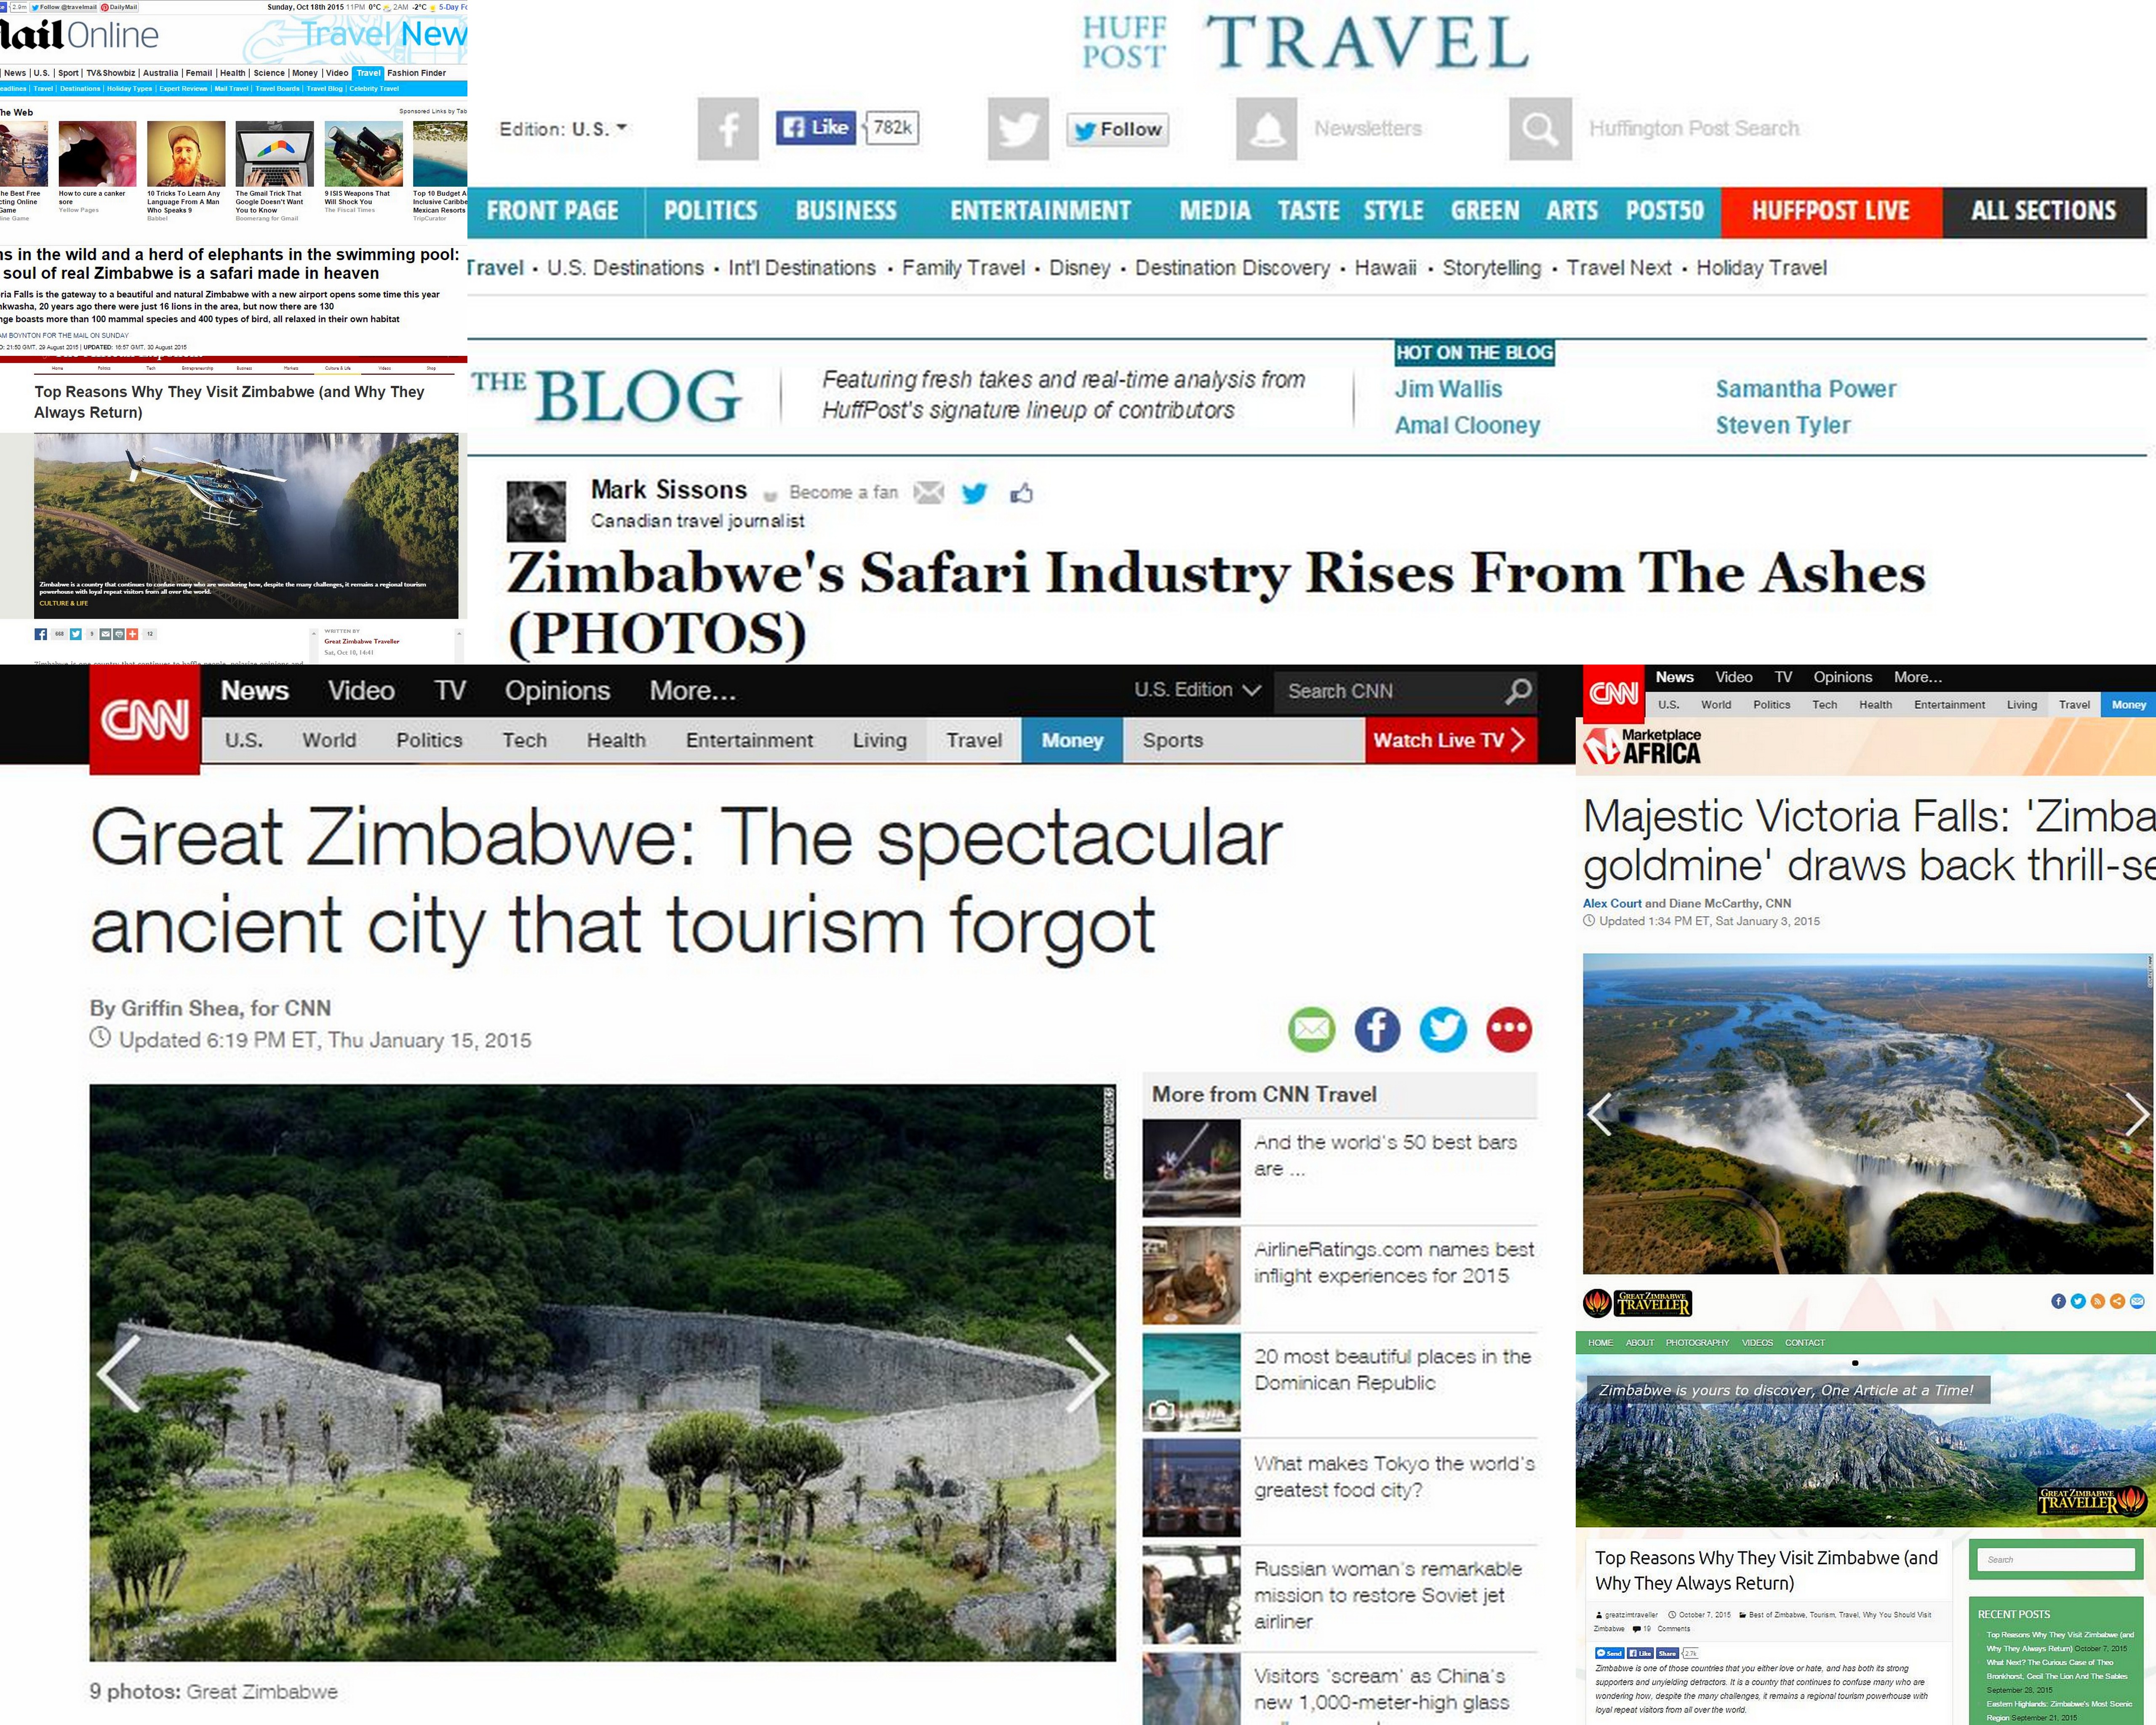 A dramatic shift in coverage of Zim by mass media is changing perceptions.